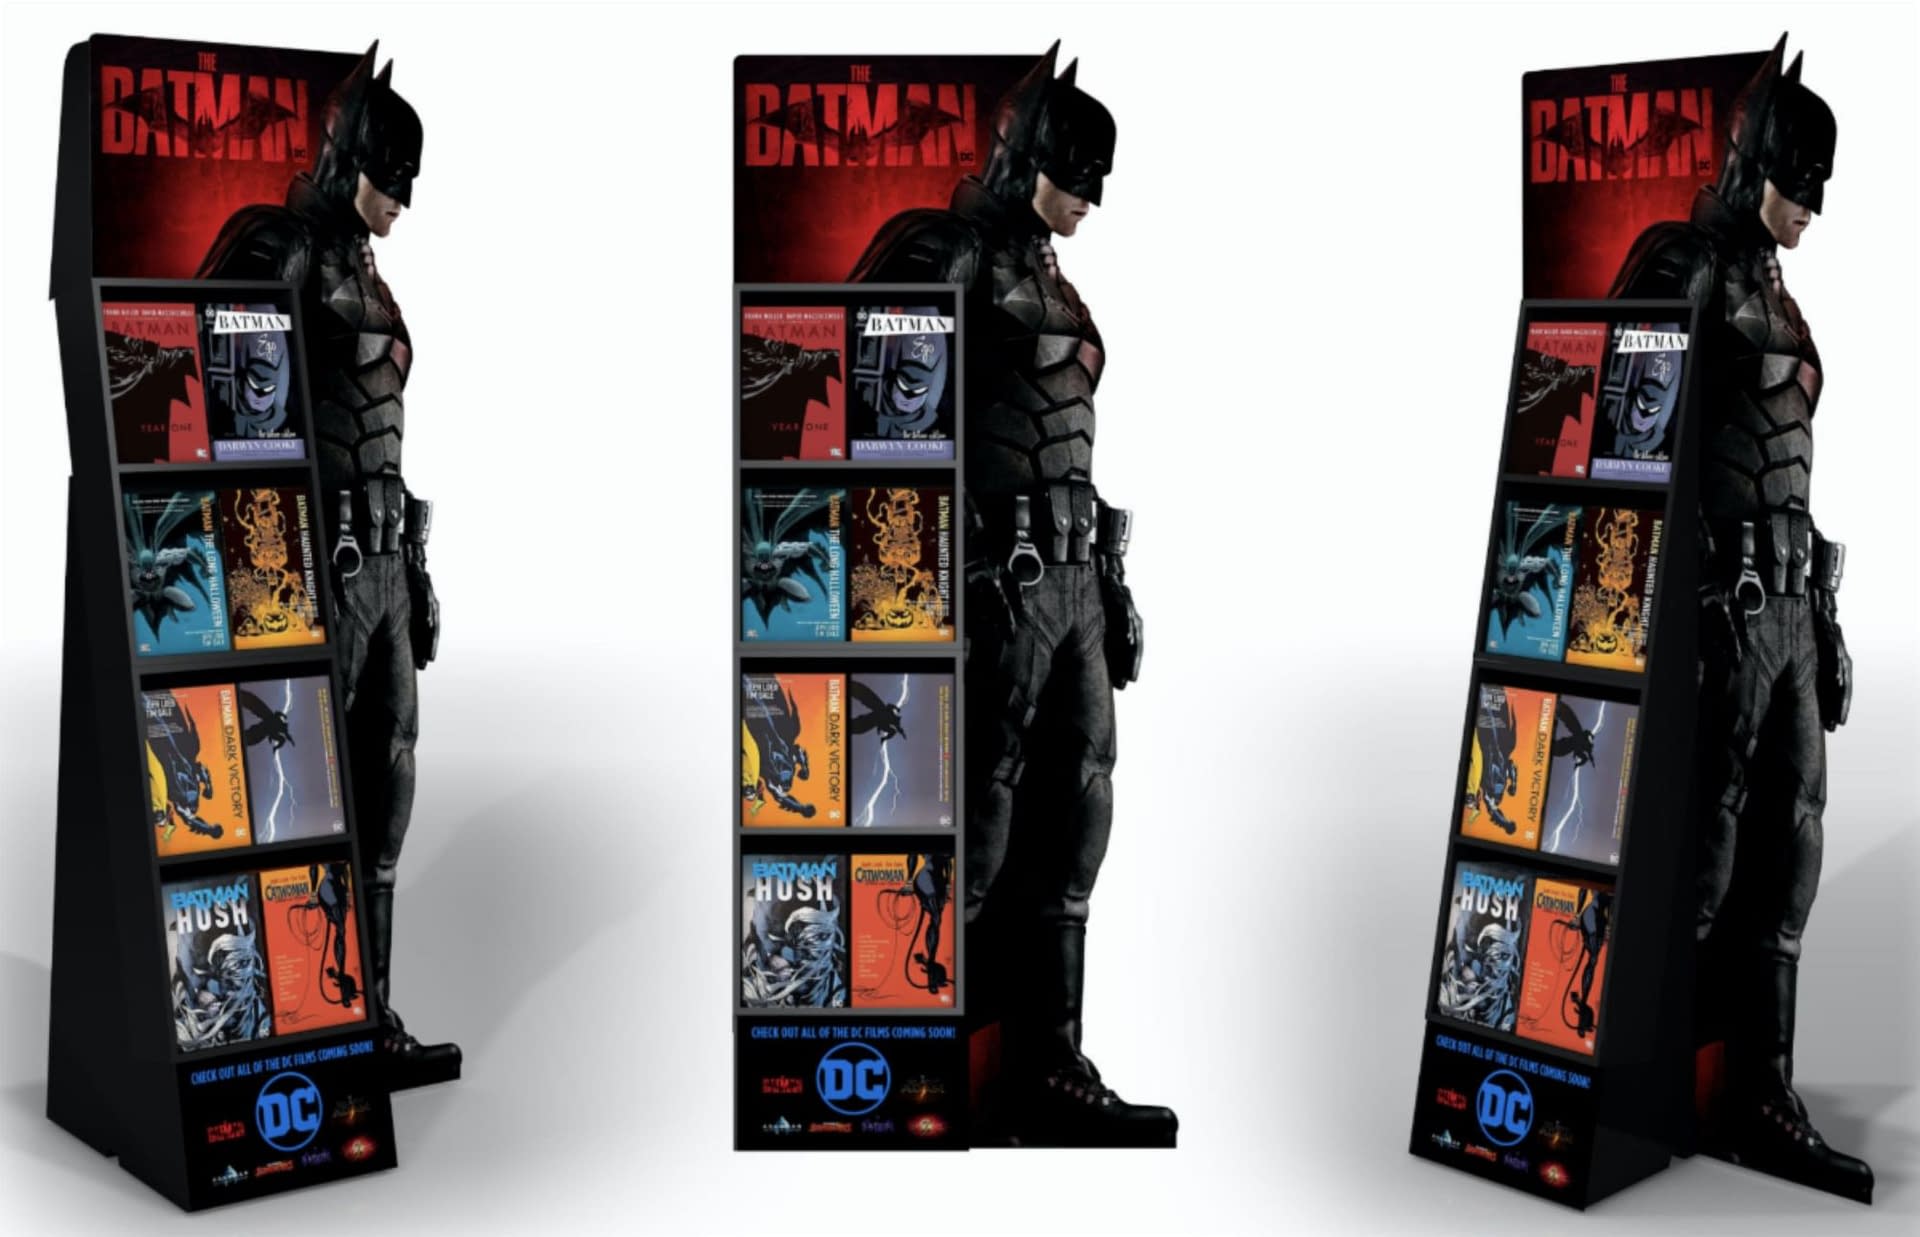 DC Comics Issues Shops With 'The Batman' Standees For Graphic Novels